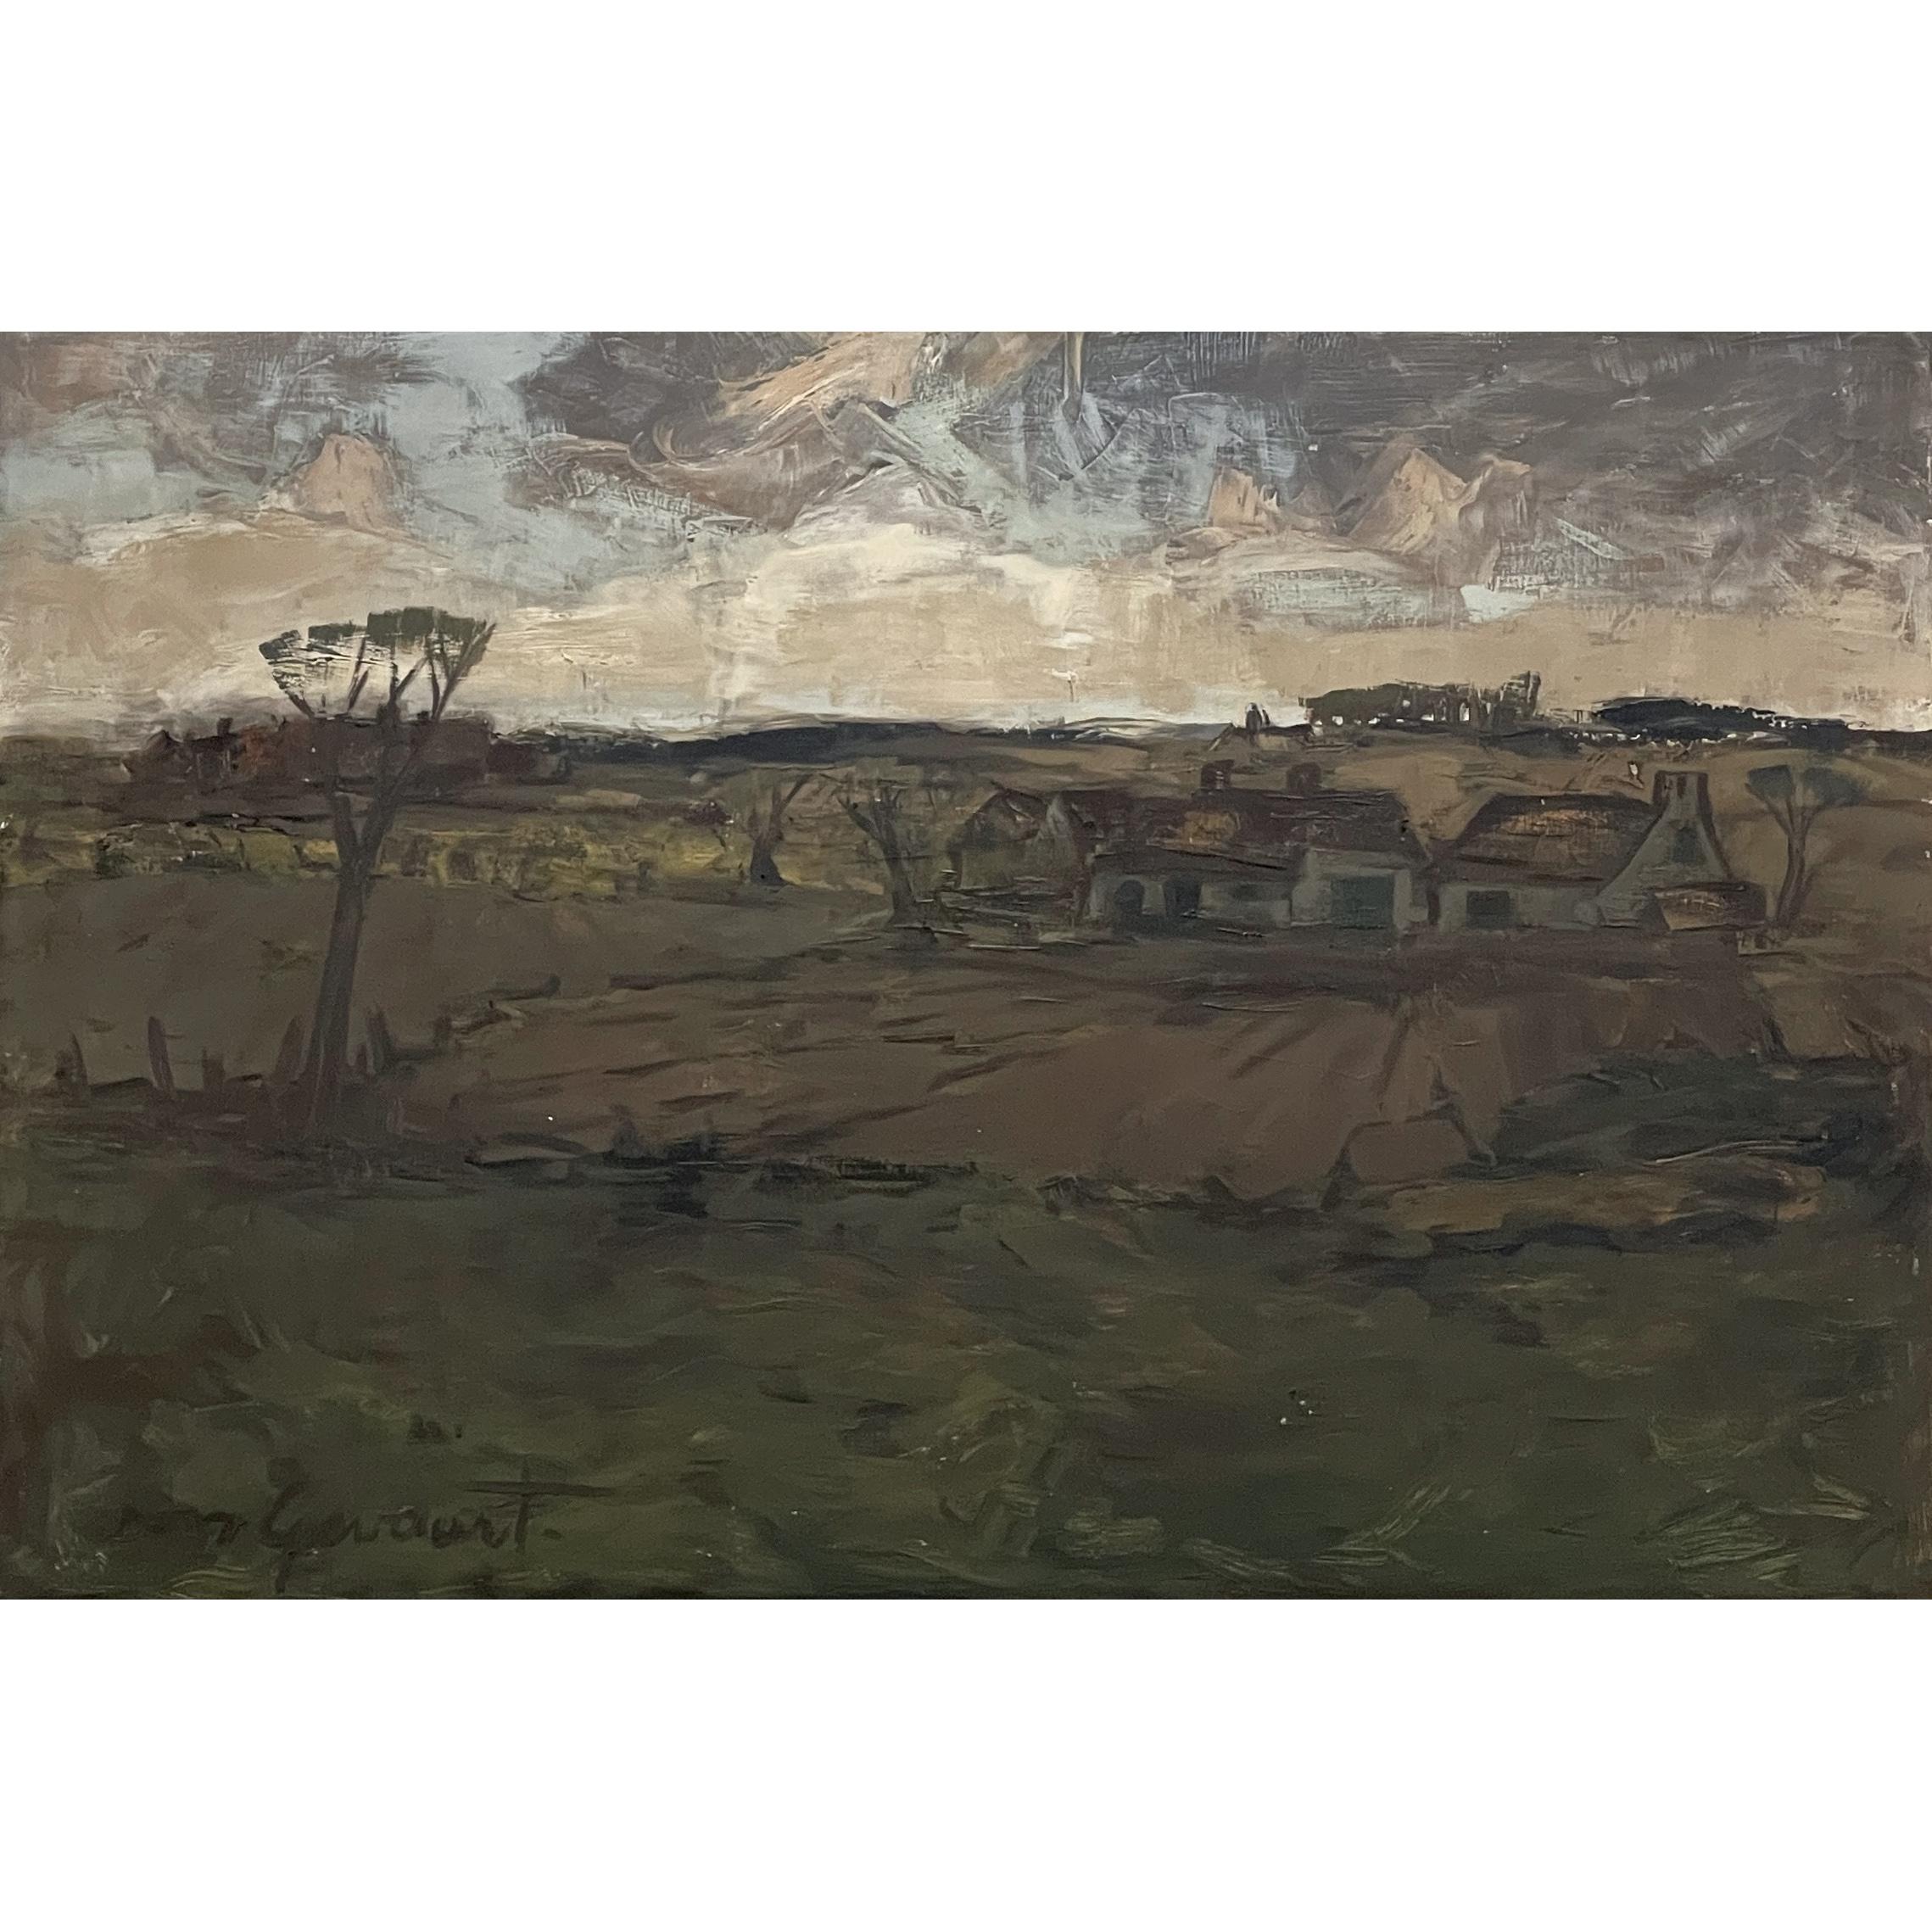 Mid-century framed oil painting on canvas by Don Gevaert is an intriguing study on the broad spectrum of gray hues, depicting an impressionistic view of a quaint homestead on rolling hills with a wintry morning sky. Gevaert has used both brush and